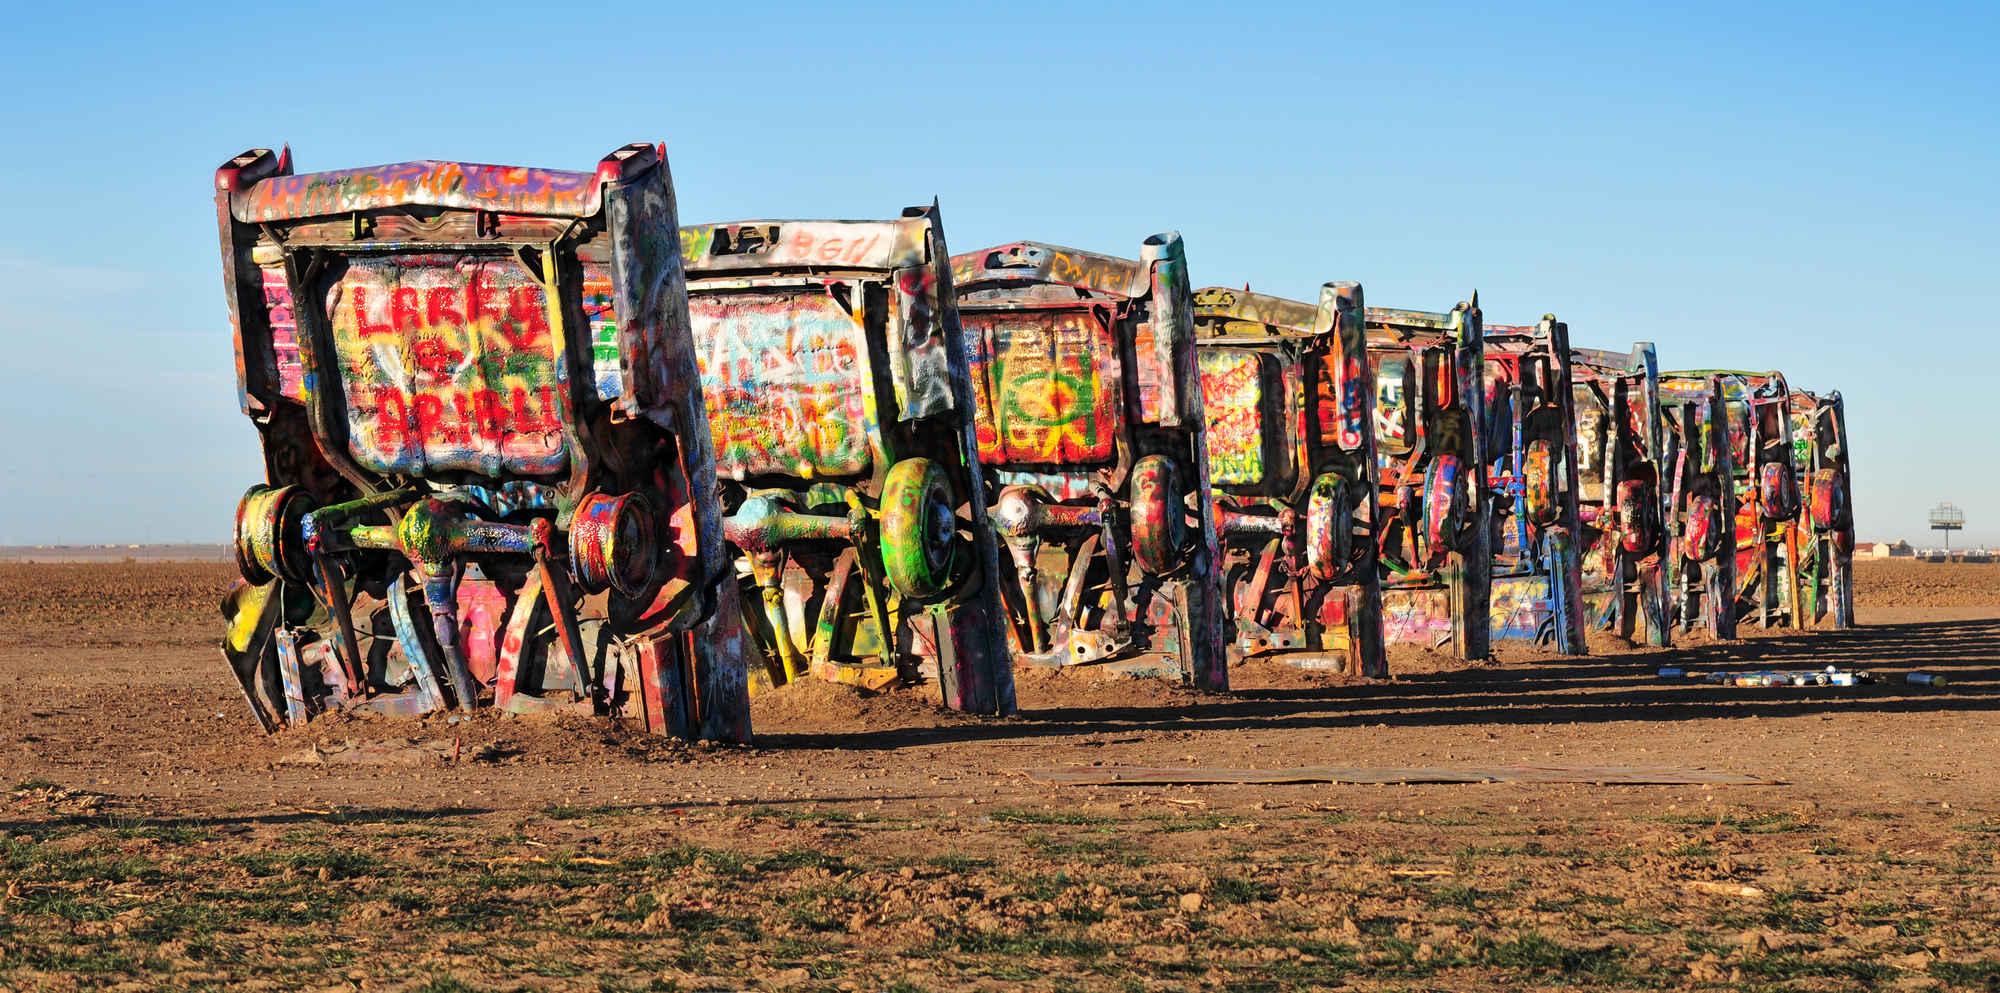 The Most Amazing Abandoned Roadside Attractions